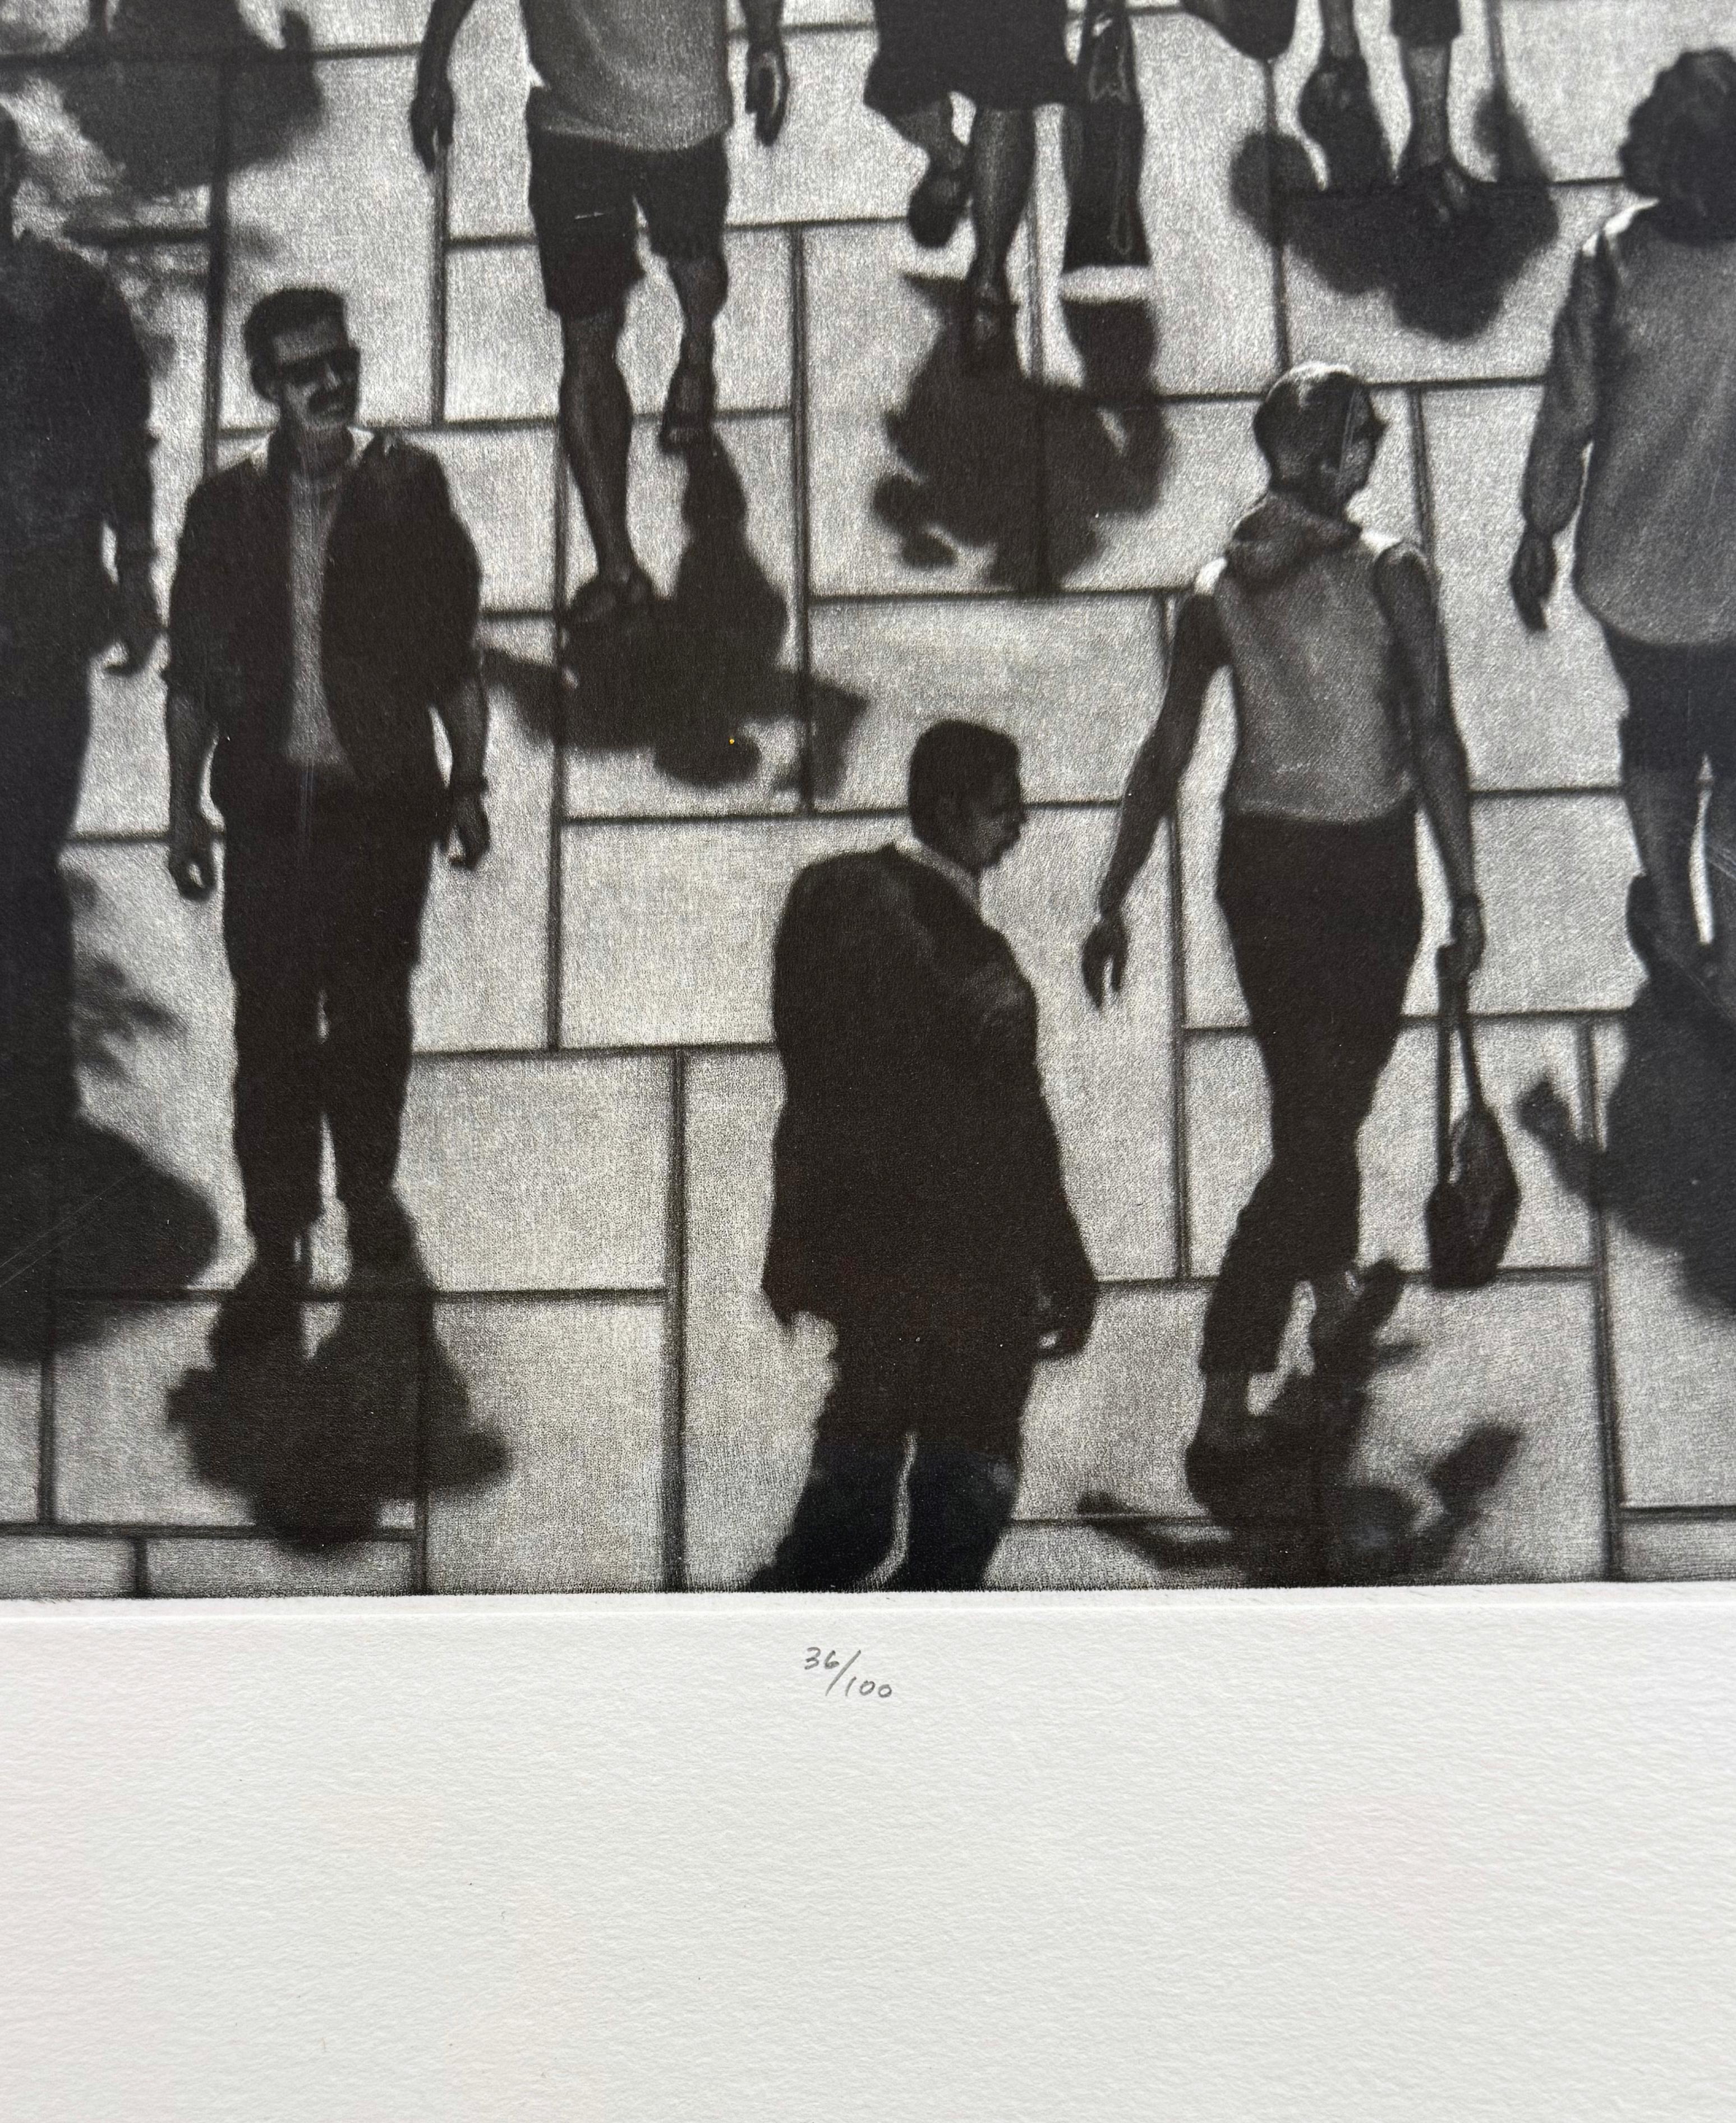 Medium: Mezzotint
Year: 2004
Edition: 100
Image Size: 15.5 x 11 inches

Art Werger’s prints show a keen observation of quiet and normally unnoticed moments. Pedestrians passing each other, lost in their own worlds. Sunlight filtering through a